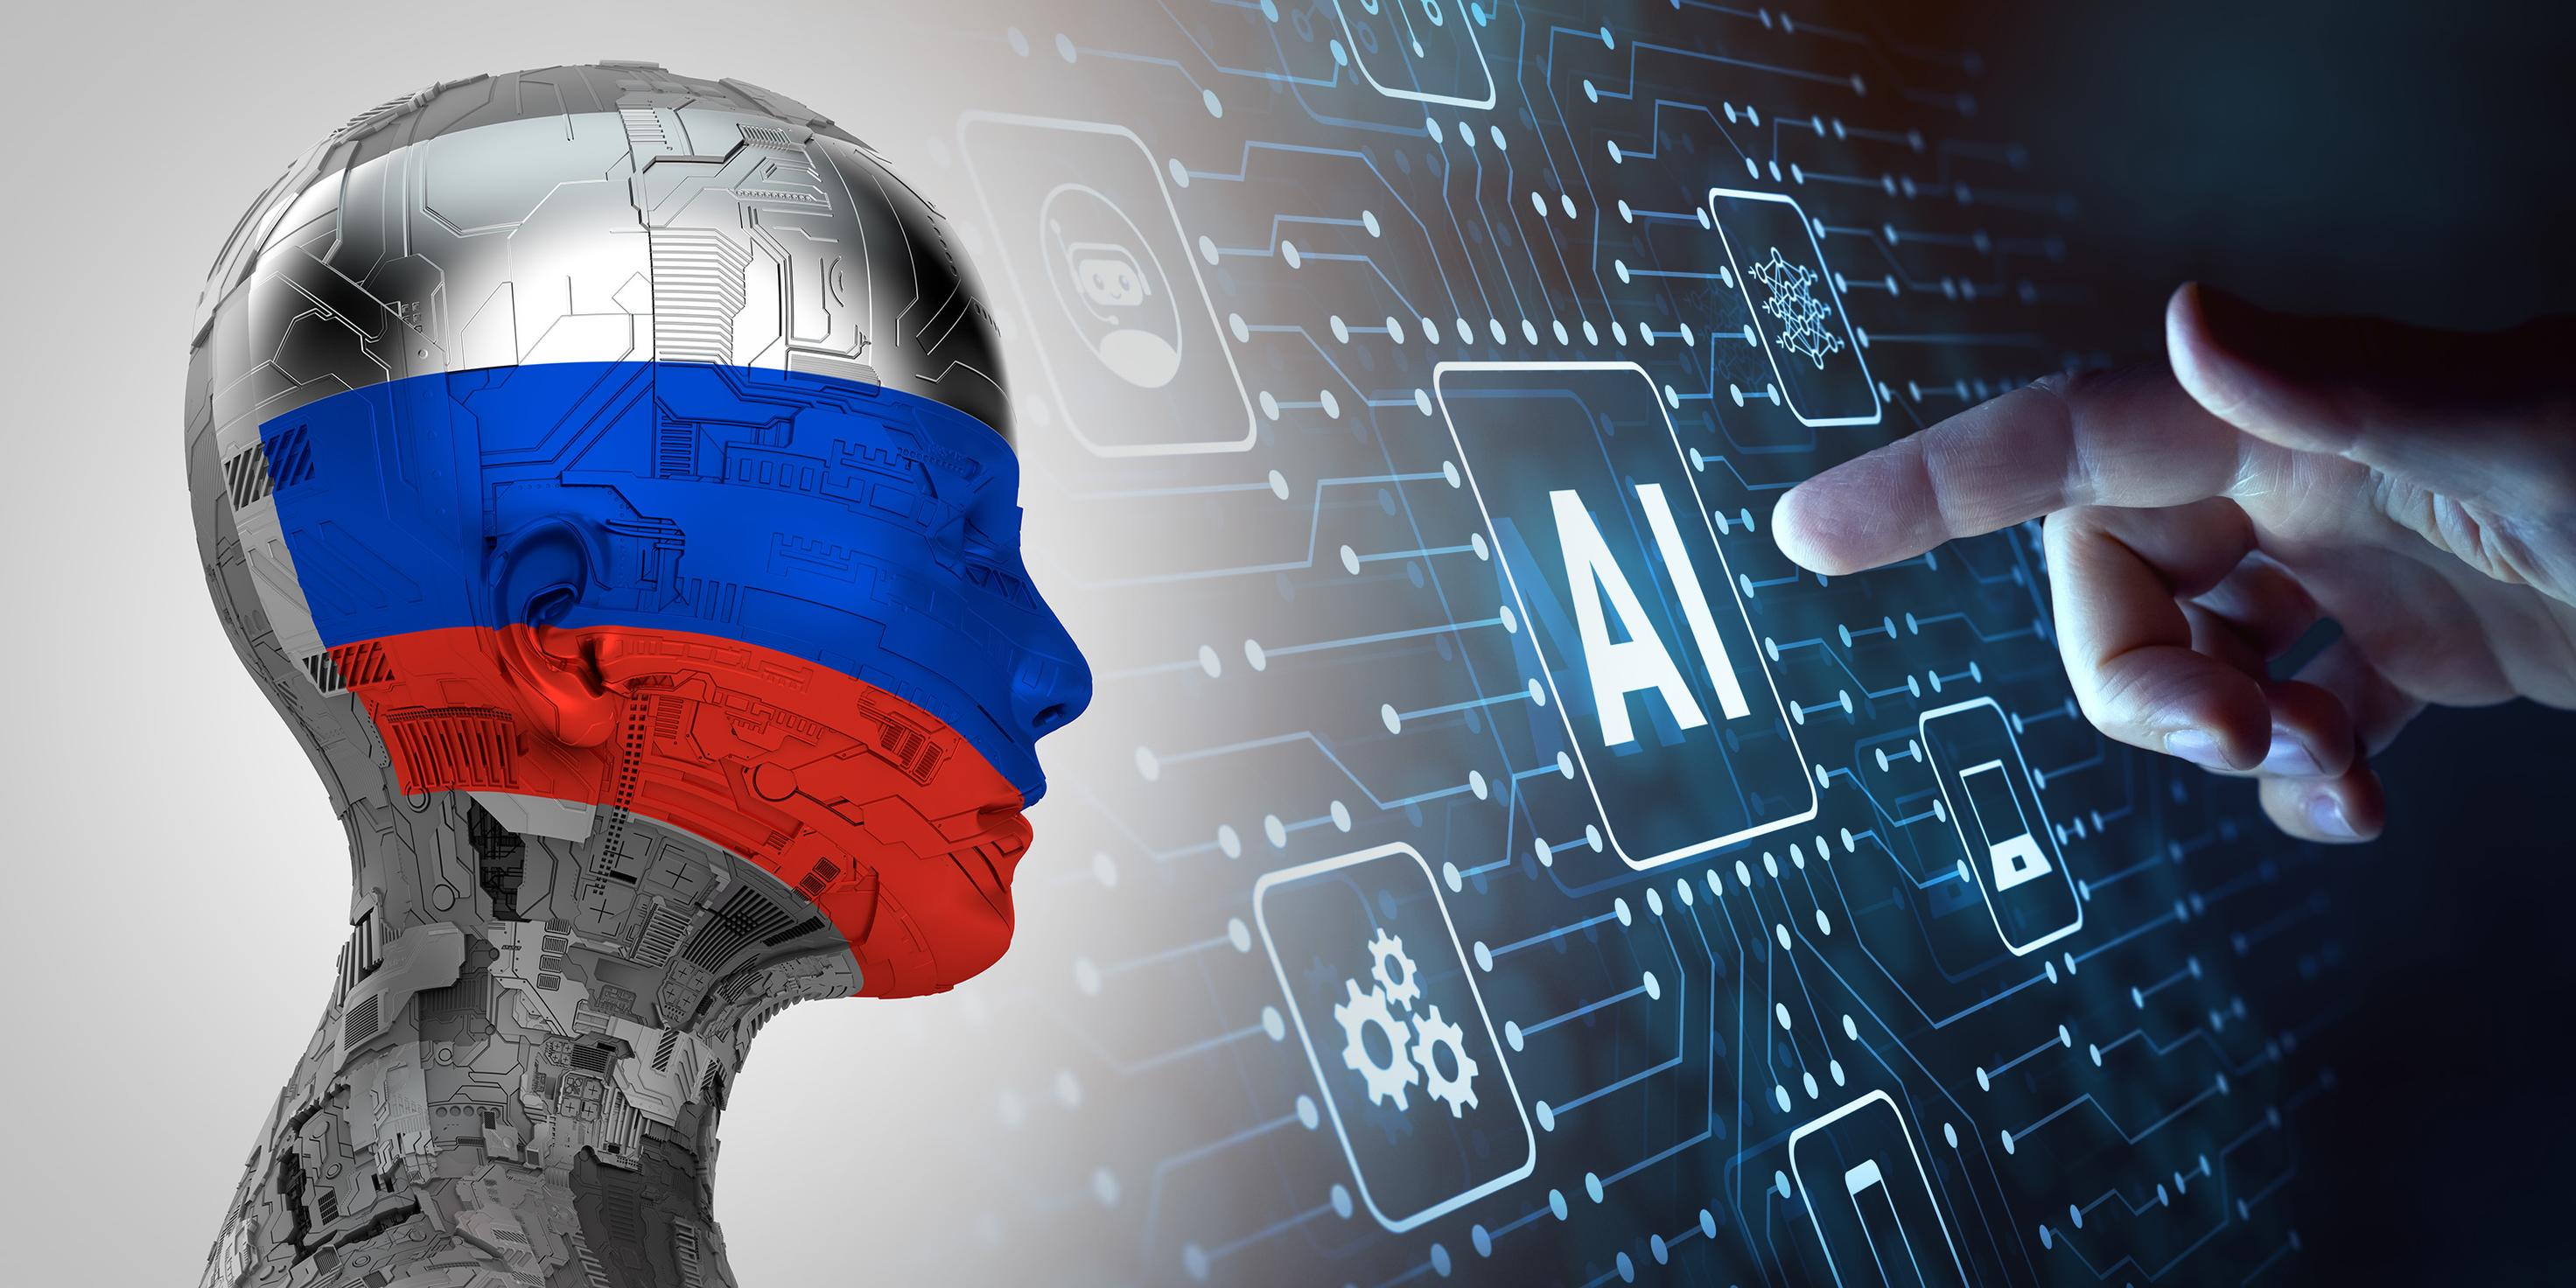 What Drives Russia Interest in Developing AI Technologies?